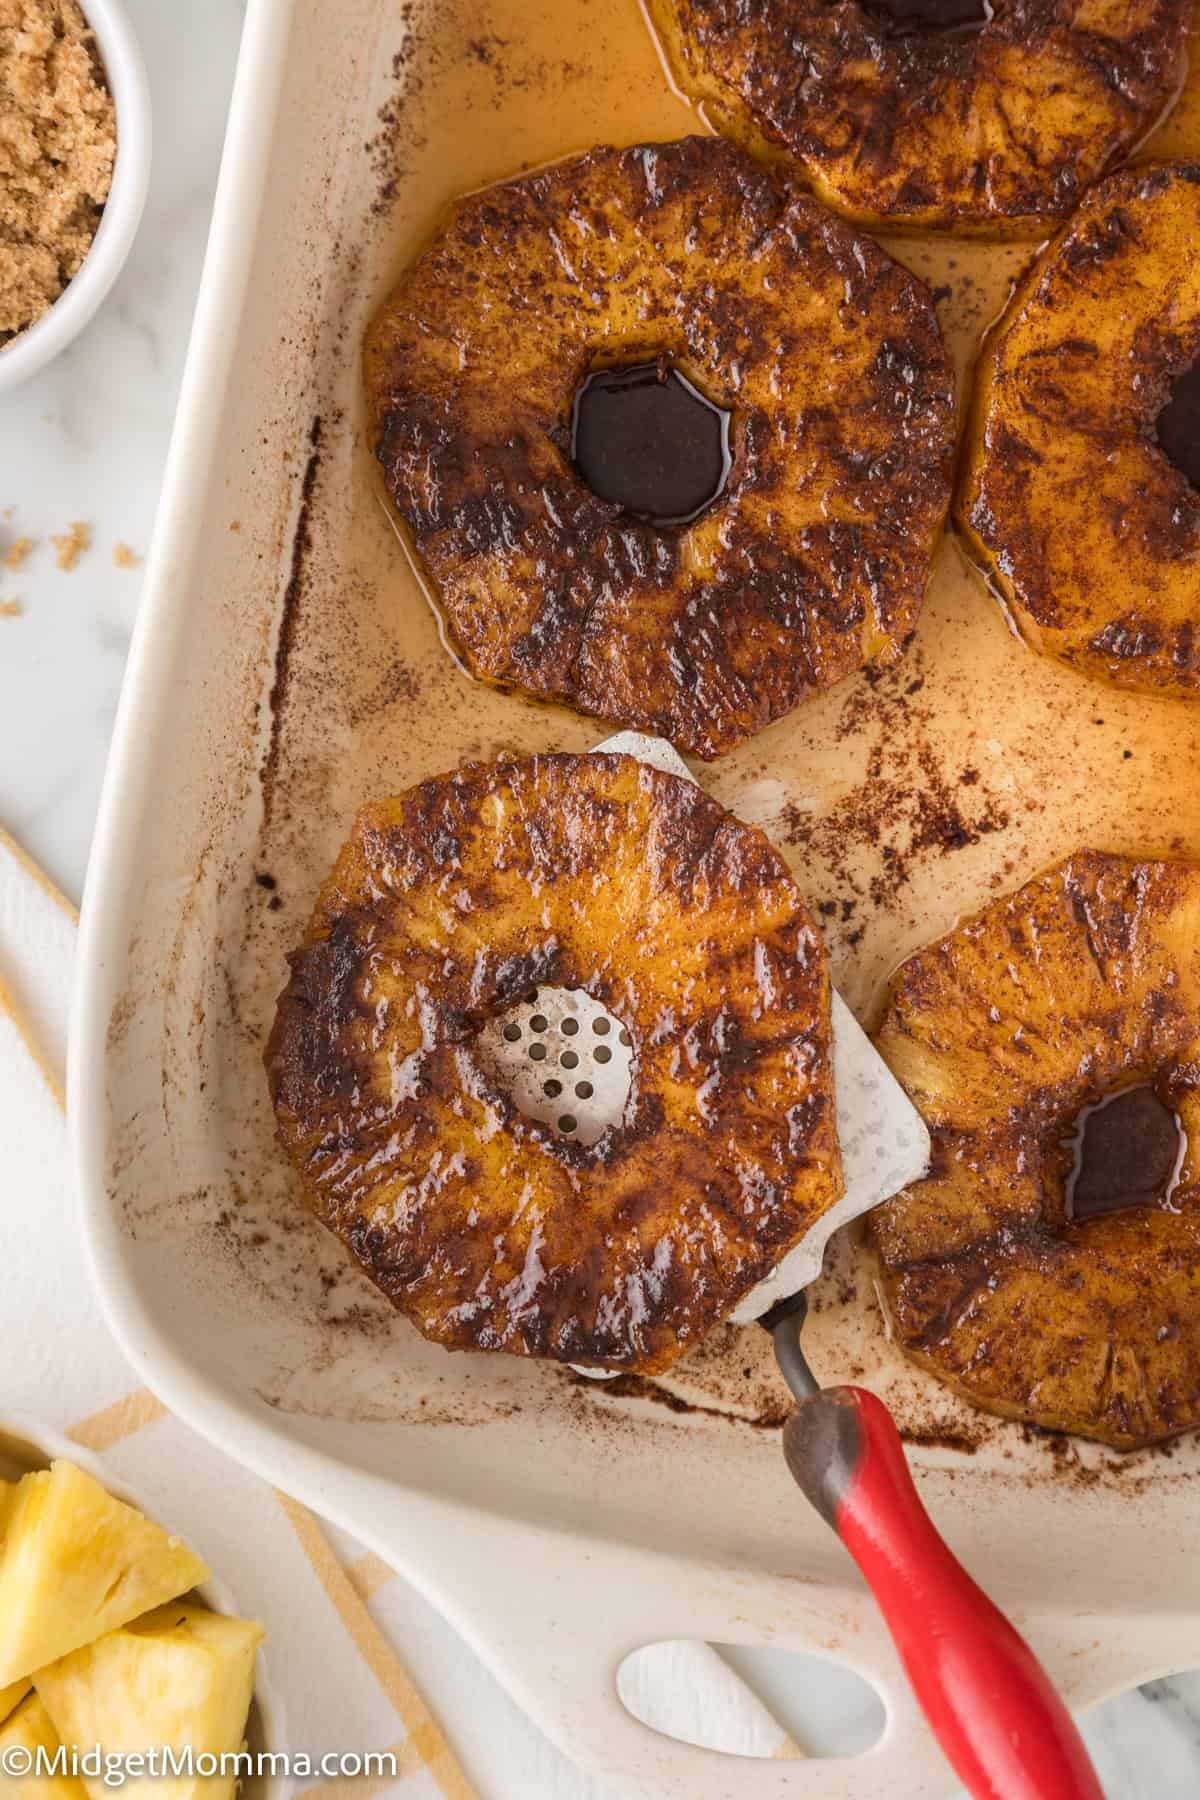 baked pineapple slices in a baking dish, caramelized with a golden-brown char, sprinkled with cinnamon, and a red spatula nearby.